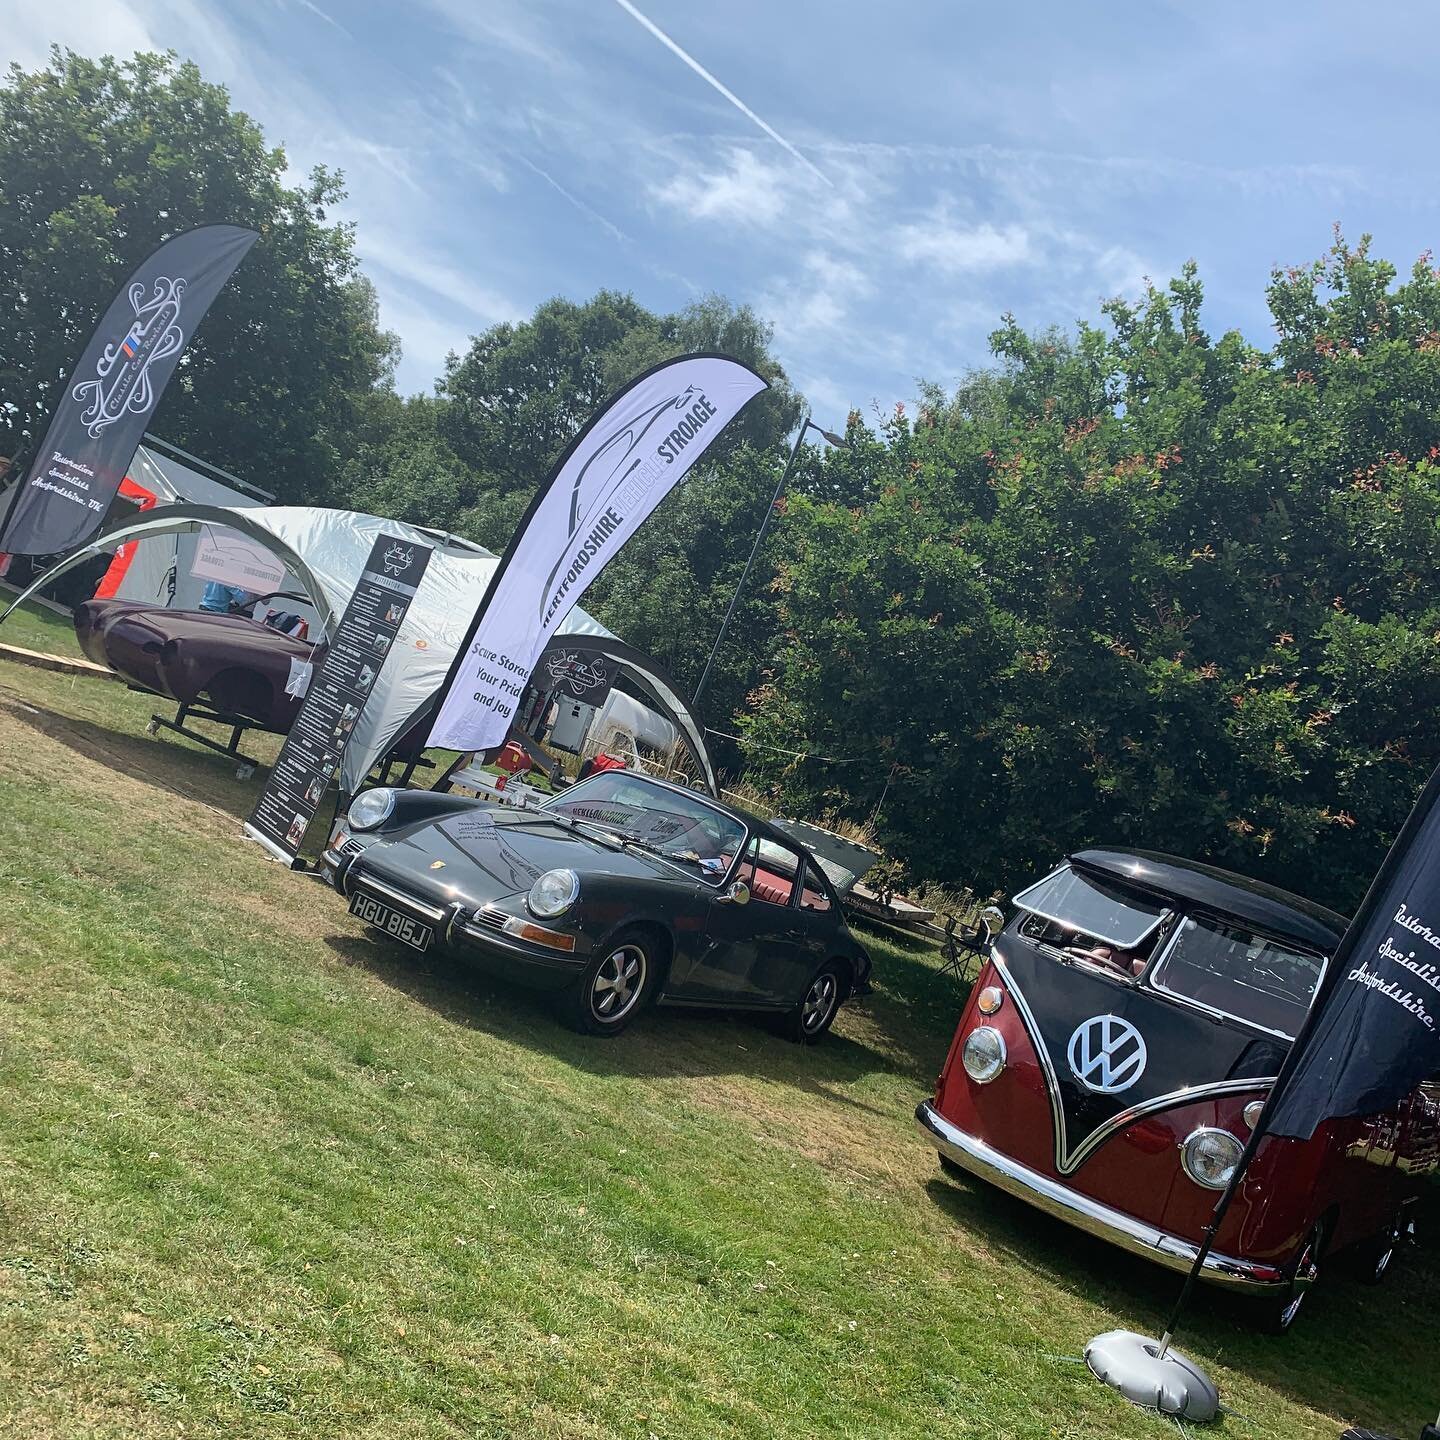 We&rsquo;re attending classics on the common in Harpenden today with @classiccarrevivals. If you&rsquo;re interested in secure indoor storage for your pride and joy please come and have a chat. @classiccarrevivals also have a fantastic collection of 